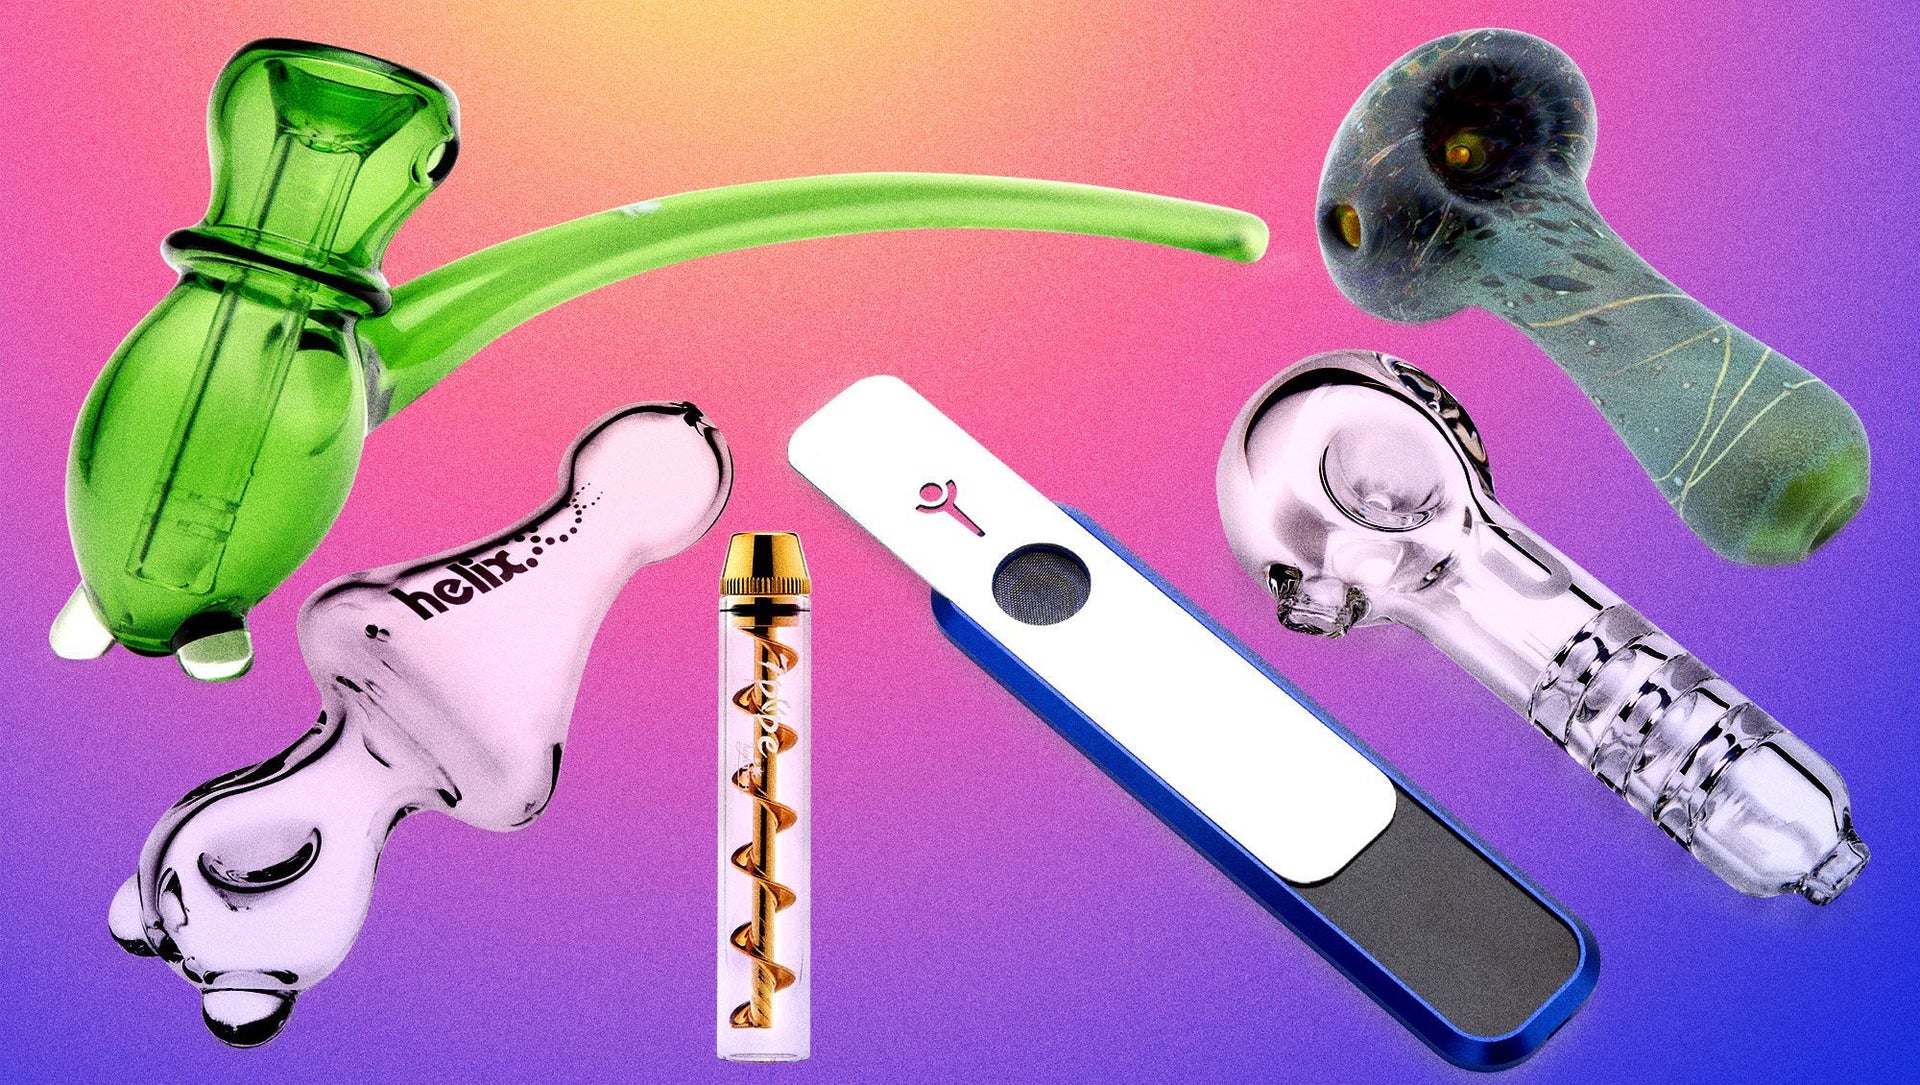 The Best Hand Pipes for Smoking Weed (2022): Our Top Picks - 420 Science